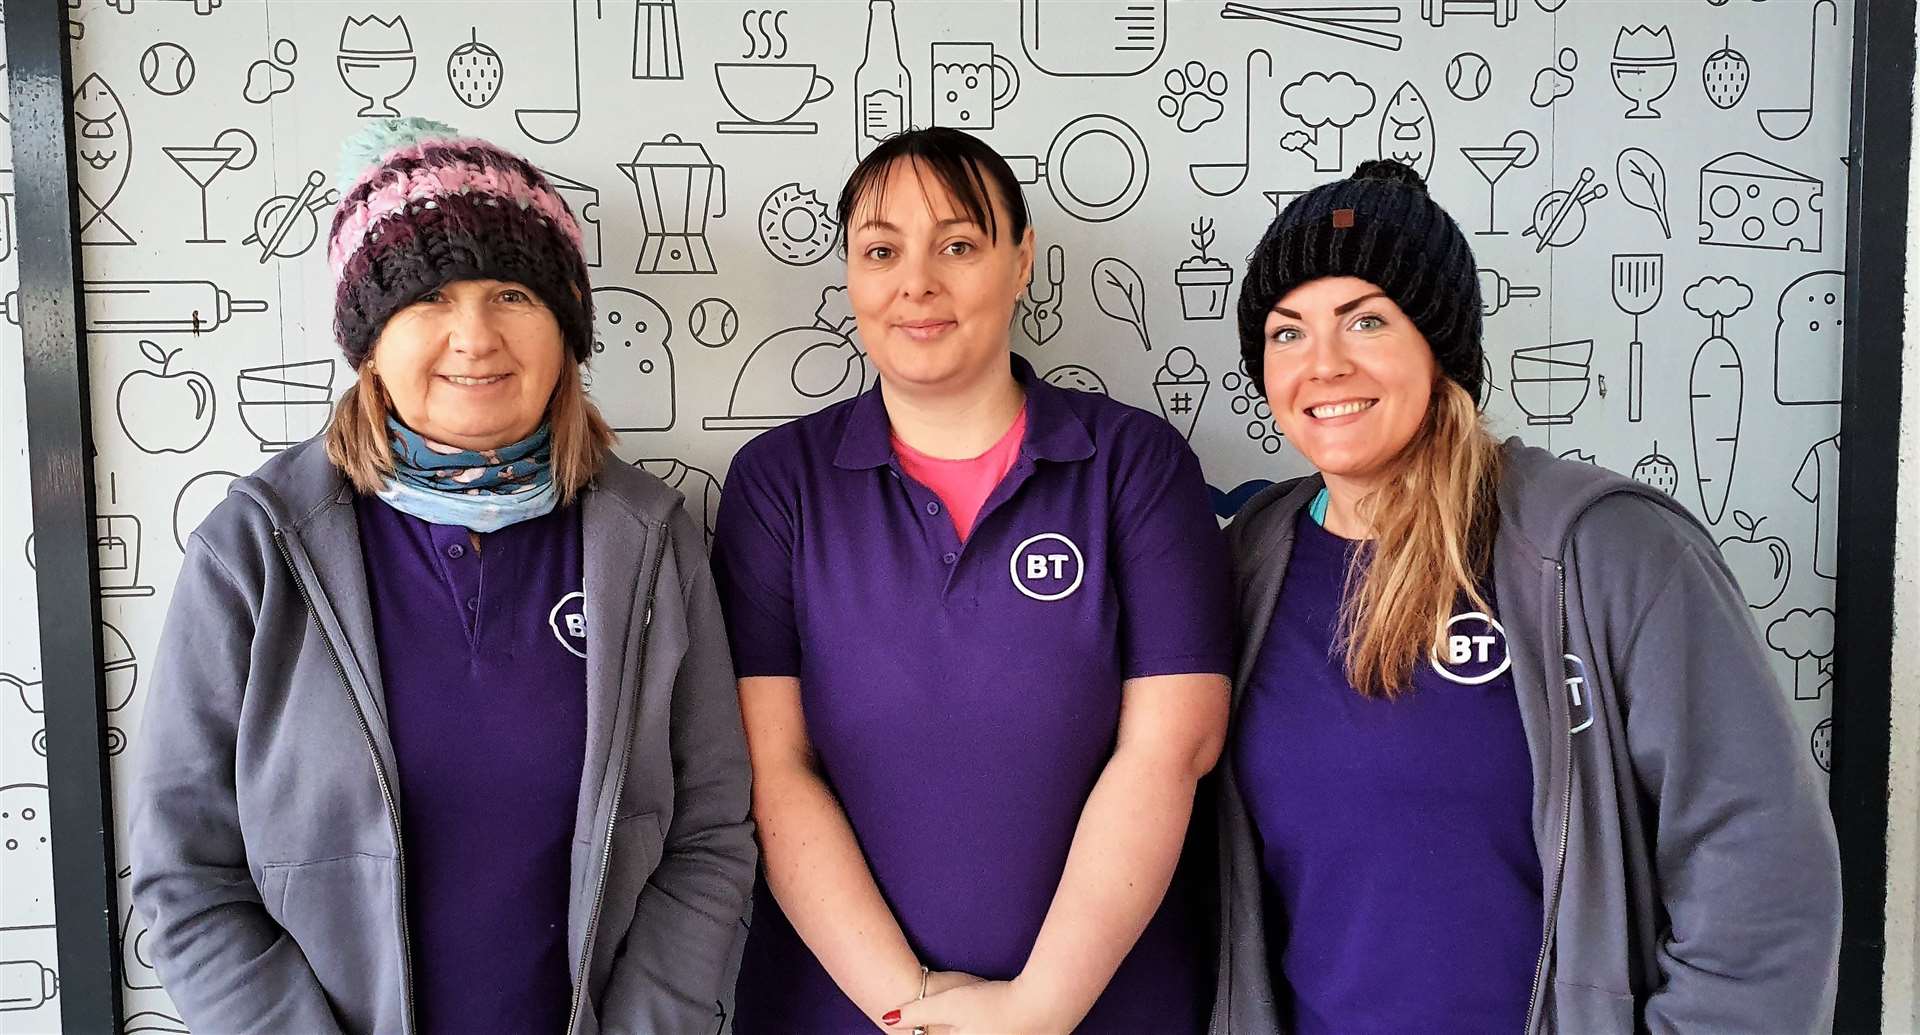 The BT Thurso staff who walked with Karen Penny included (from left) Karon Jappy, Angela Barnet and Hannah Perriewood.